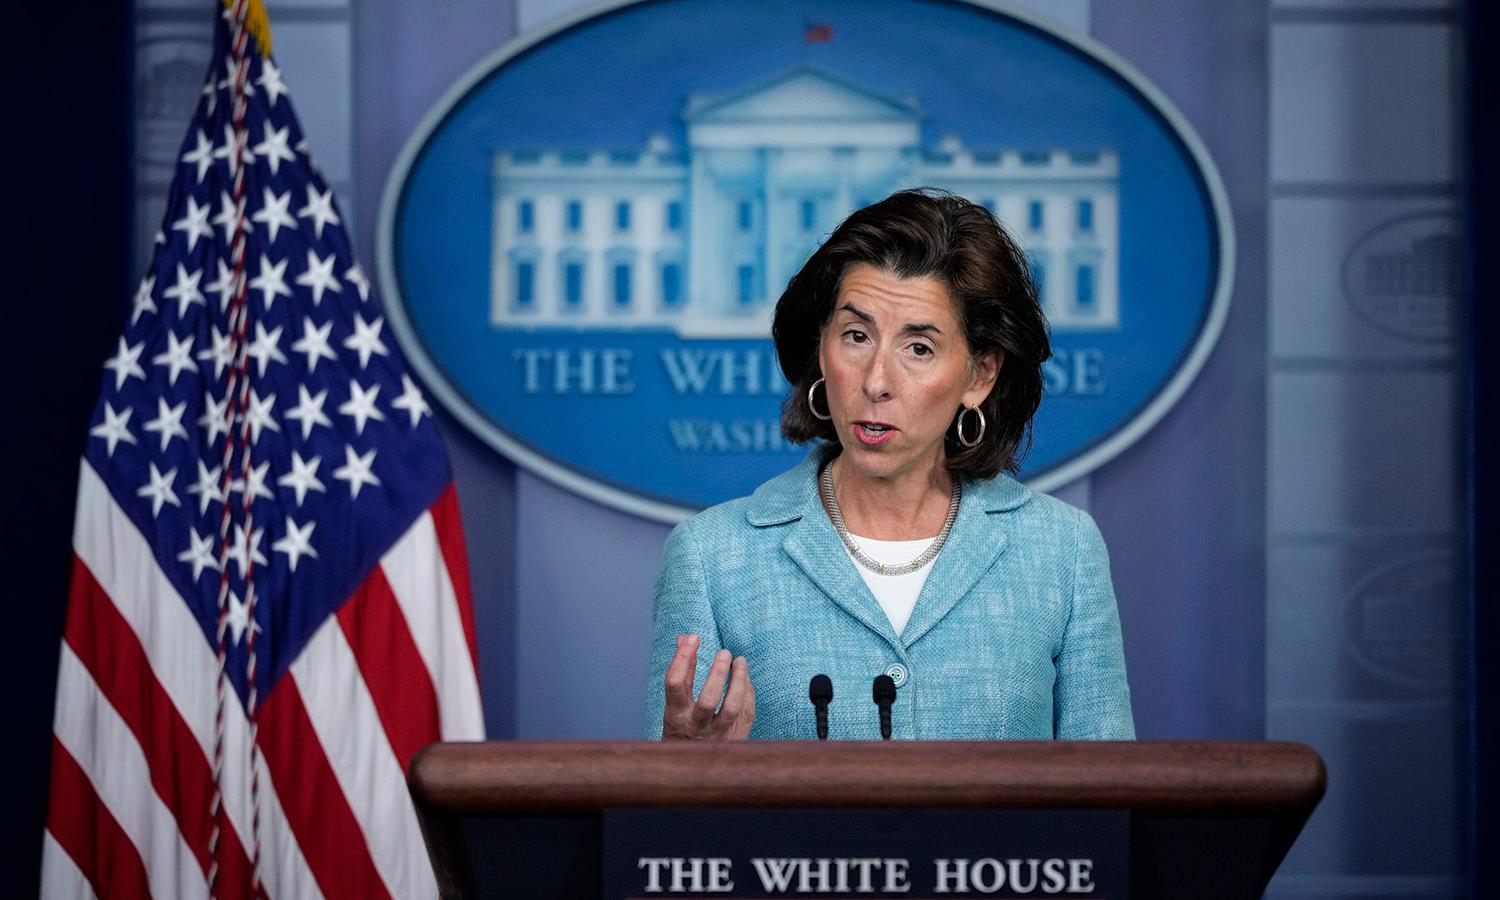 Commerce Secretary Gina Raimondo speaks during the daily press briefing at the White House on July 22, 2021, in Washington. (Photo by Drew Angerer/Getty Images)